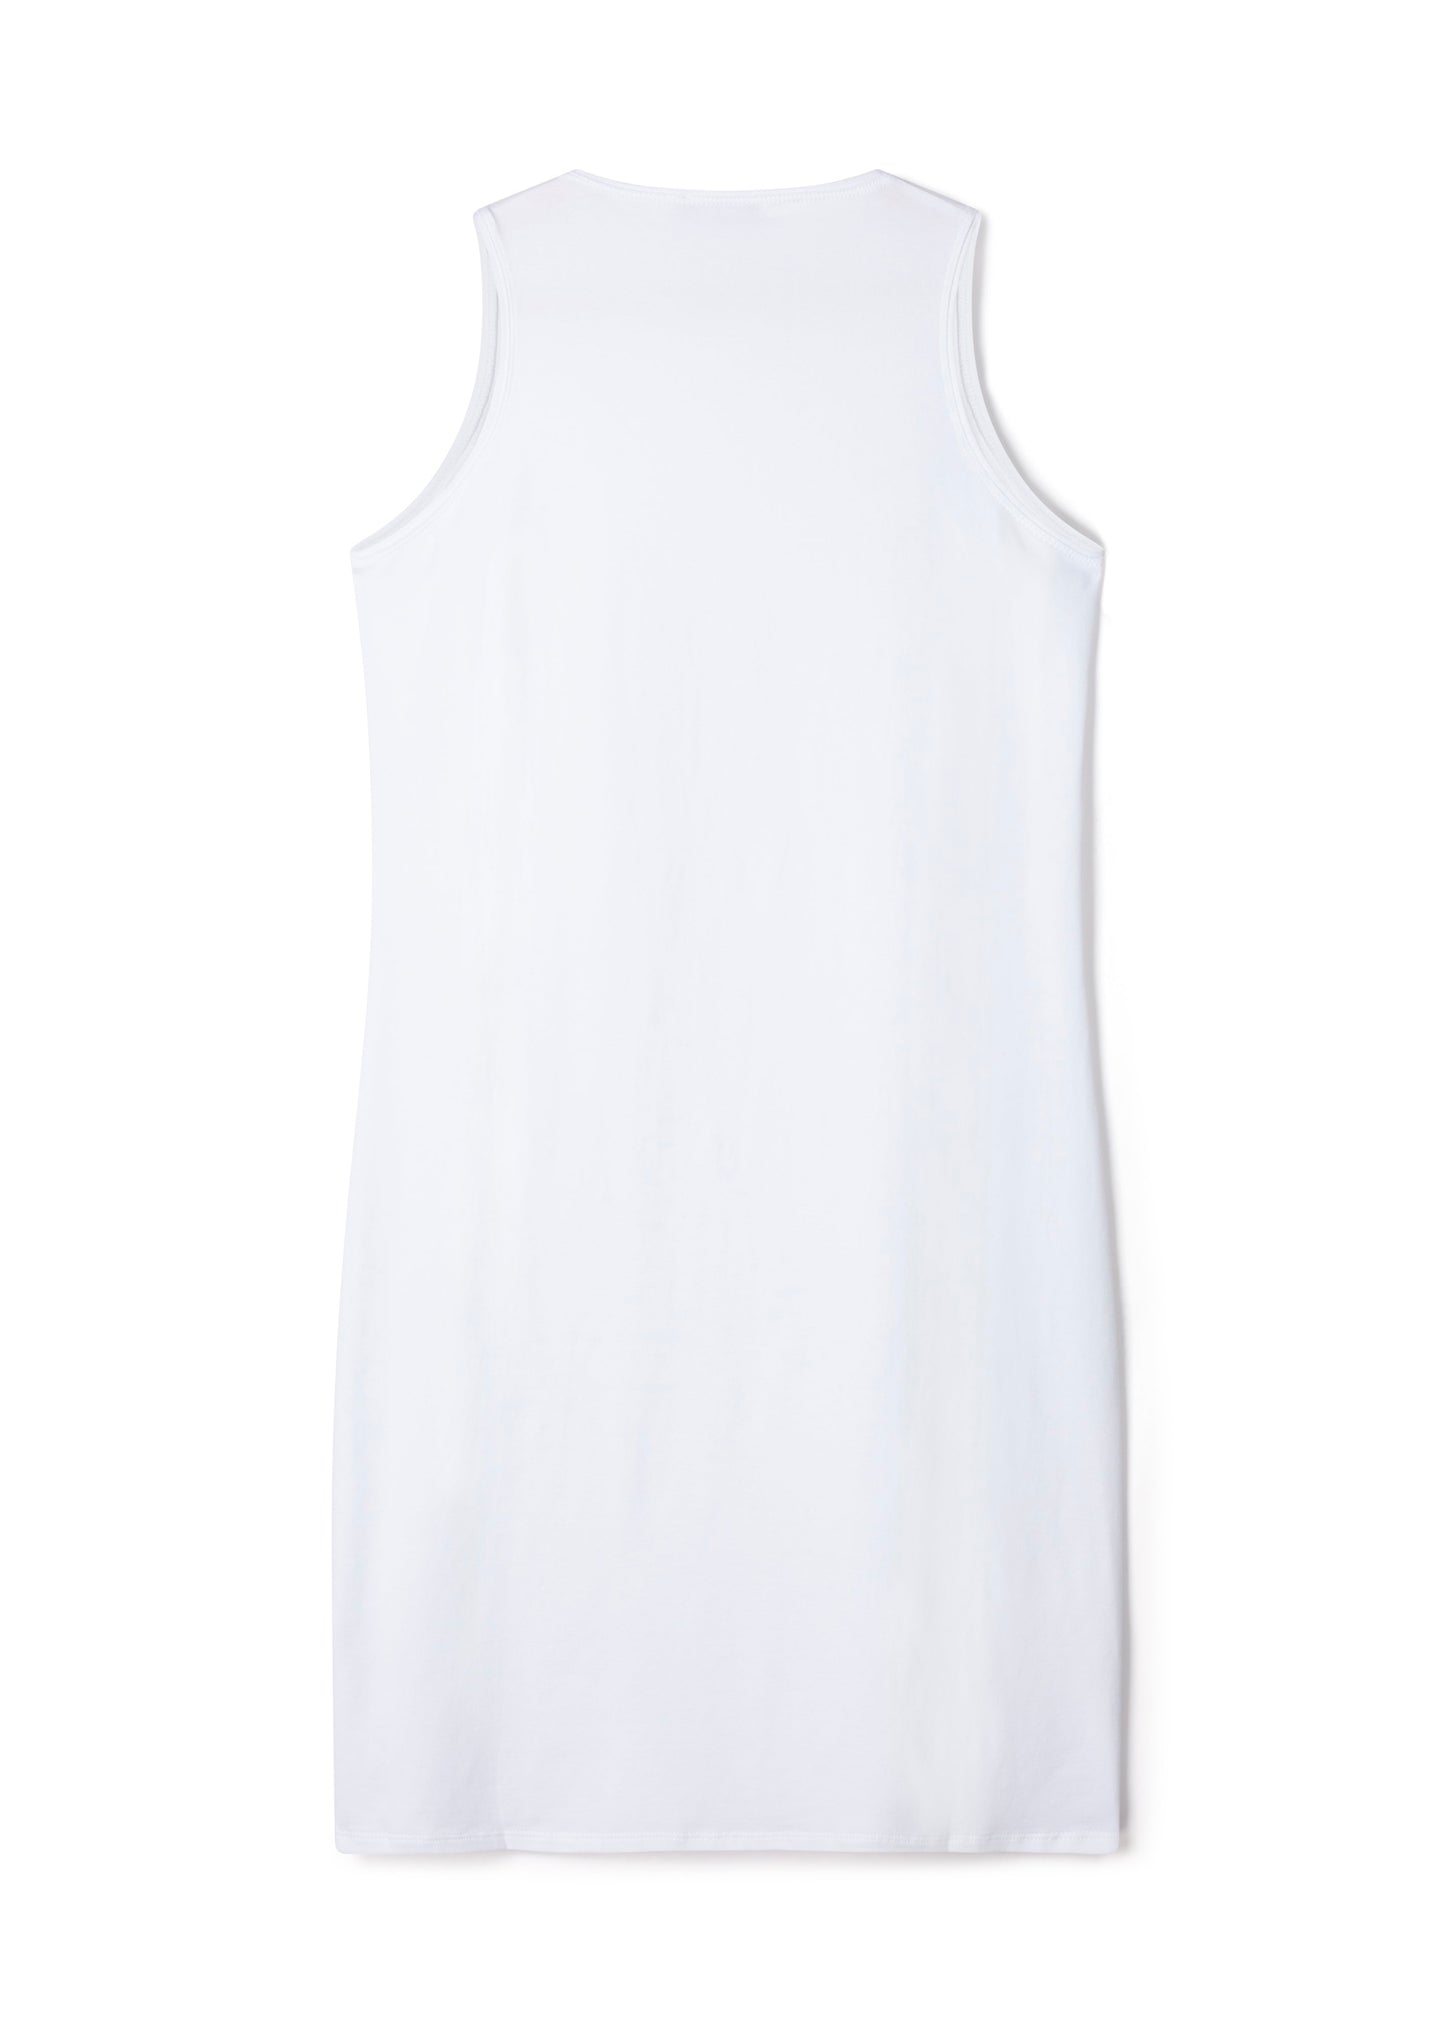 Chalk UK Organic - Claire Dress in White*